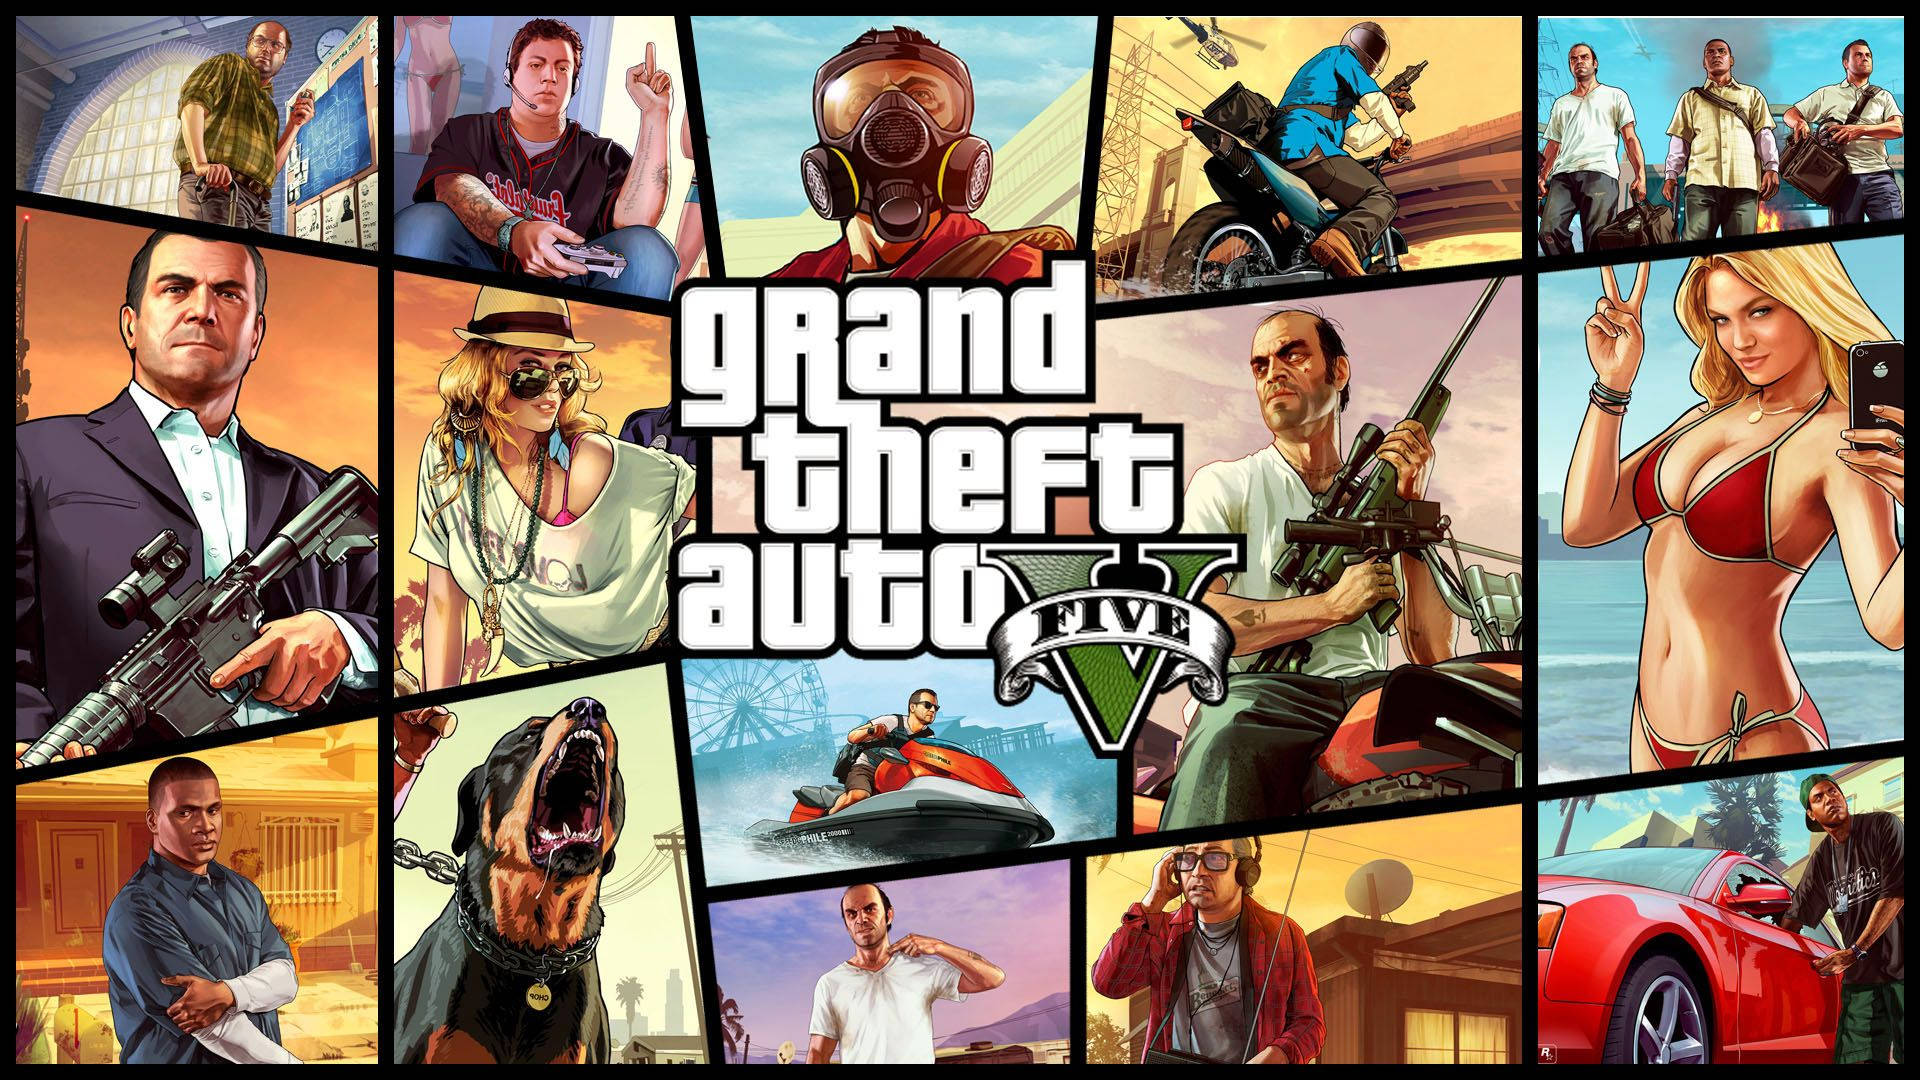 Enjoy the thrills of Grand Theft Auto V while getting a cool look Wallpaper